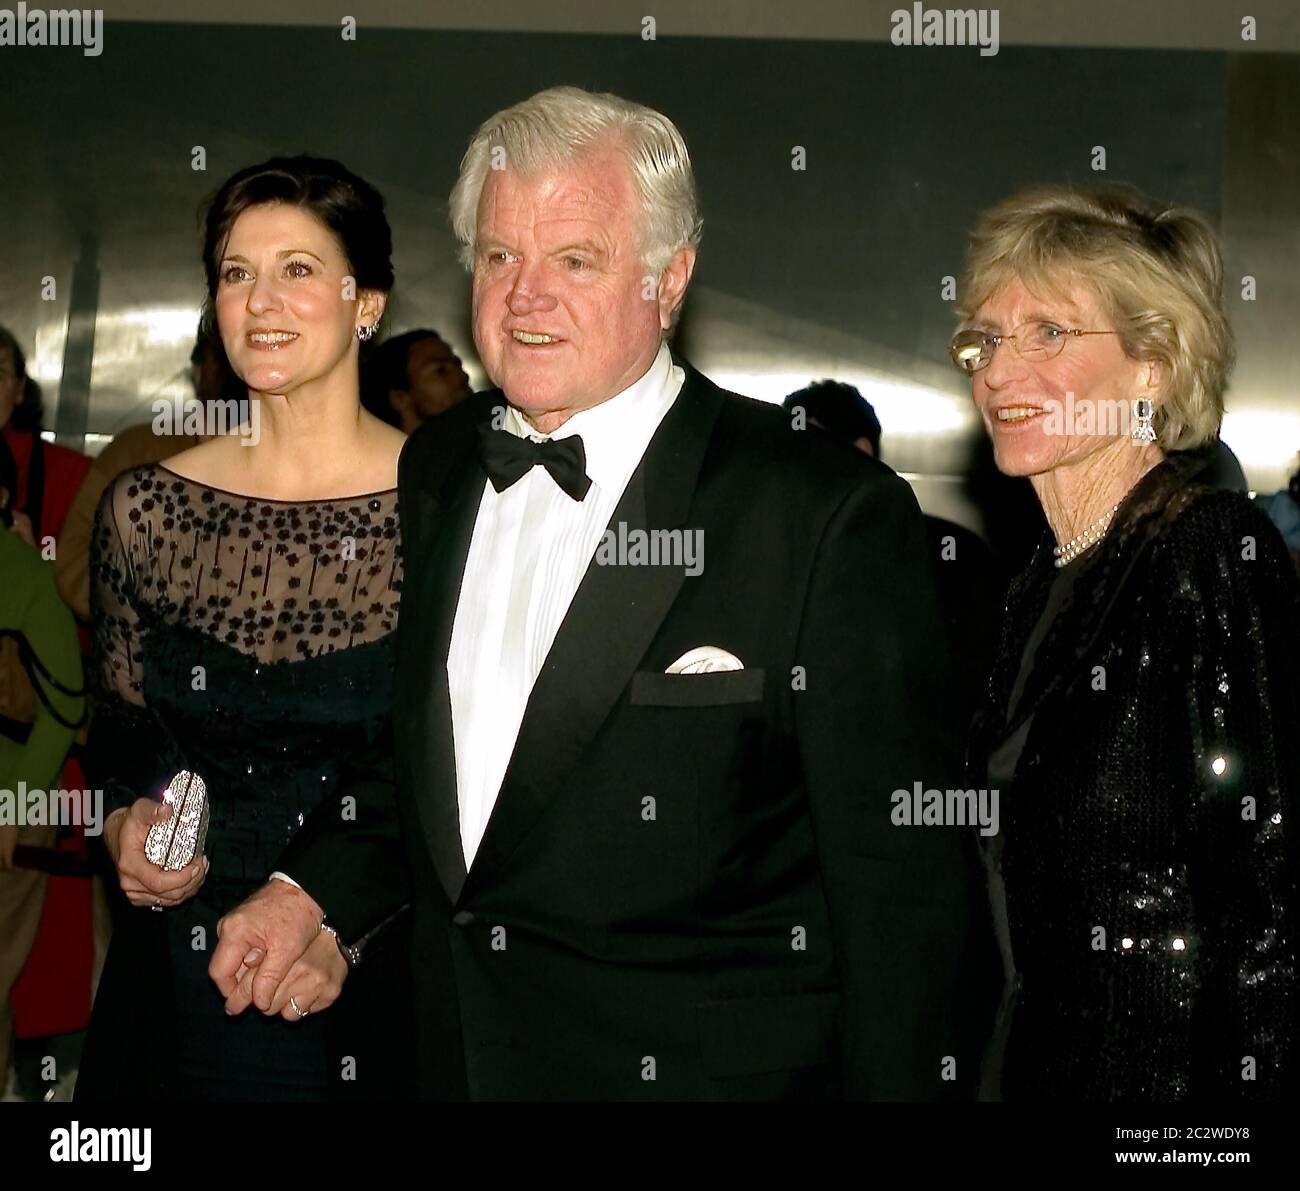 Washington, DC - December 4, 2005 -- United States Senator Ted Kennedy (Democrat of Massachusetts), center, arrives for the Kennedy Center Honors tapingwith his wife, Victoria, left, and sister, Jean Kennedy Smith, right, at the John F. Kennedy Center for the Performing Arts in Washington, DC on December 4, 2005.Credit: Ron Sachs/CNP /MediaPunch Stock Photo